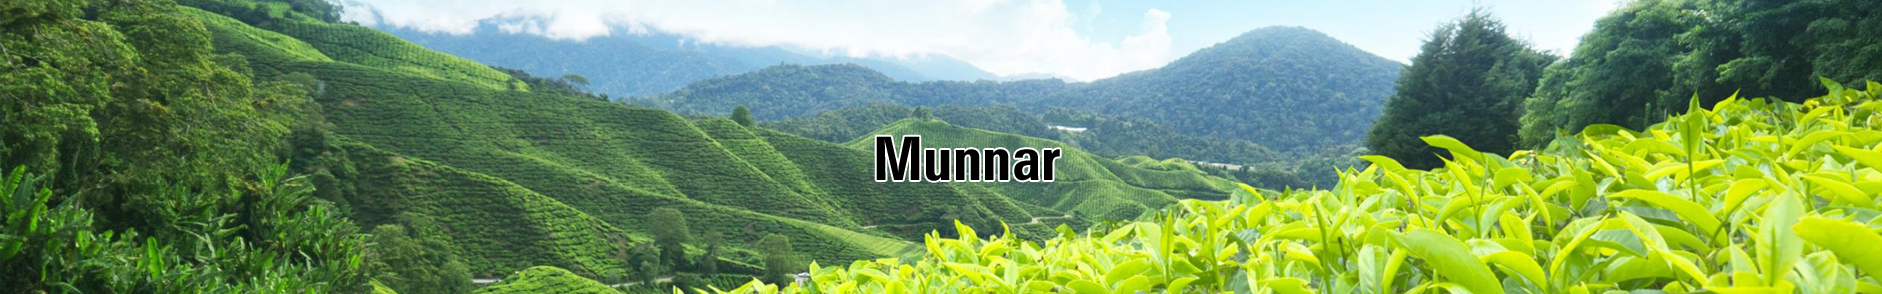 Munnar Hill Station Holiday Packages